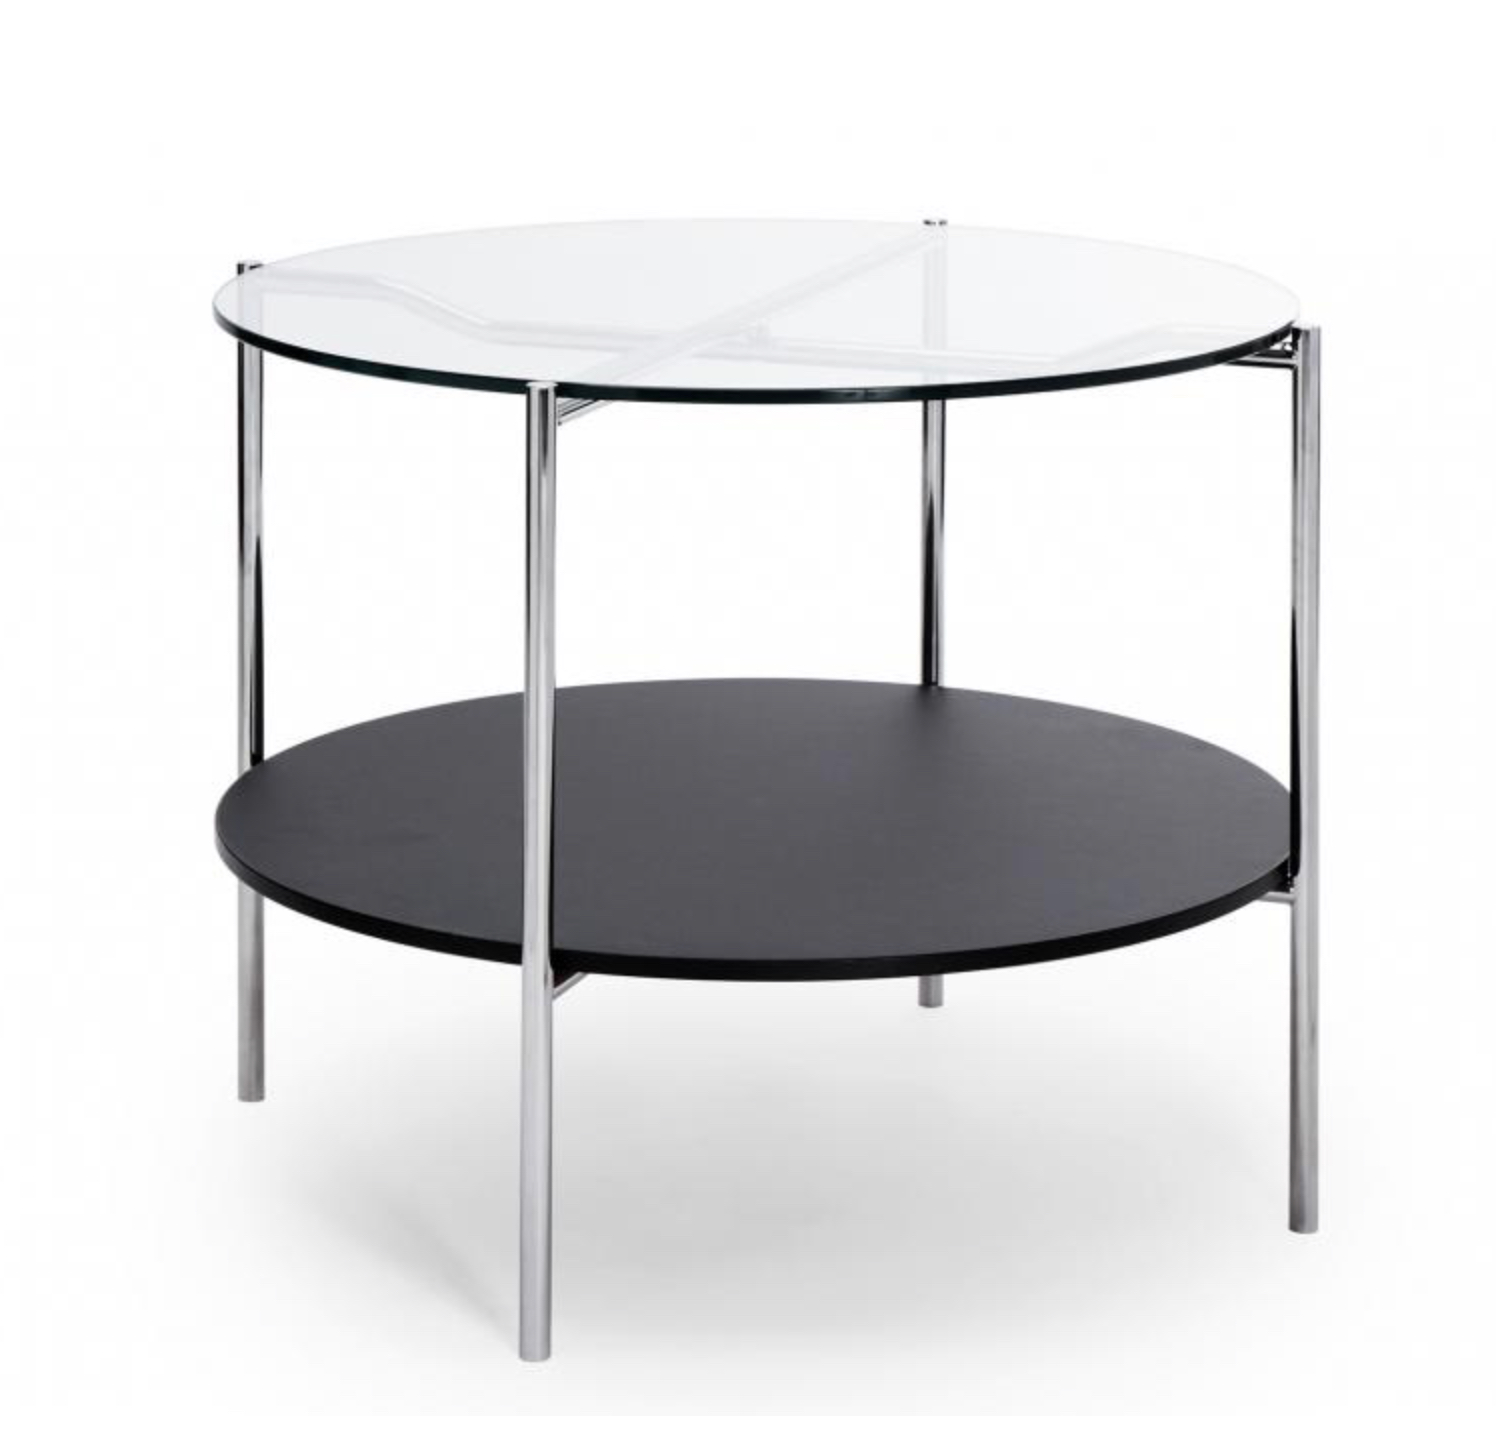 Moser table 1752 by embru